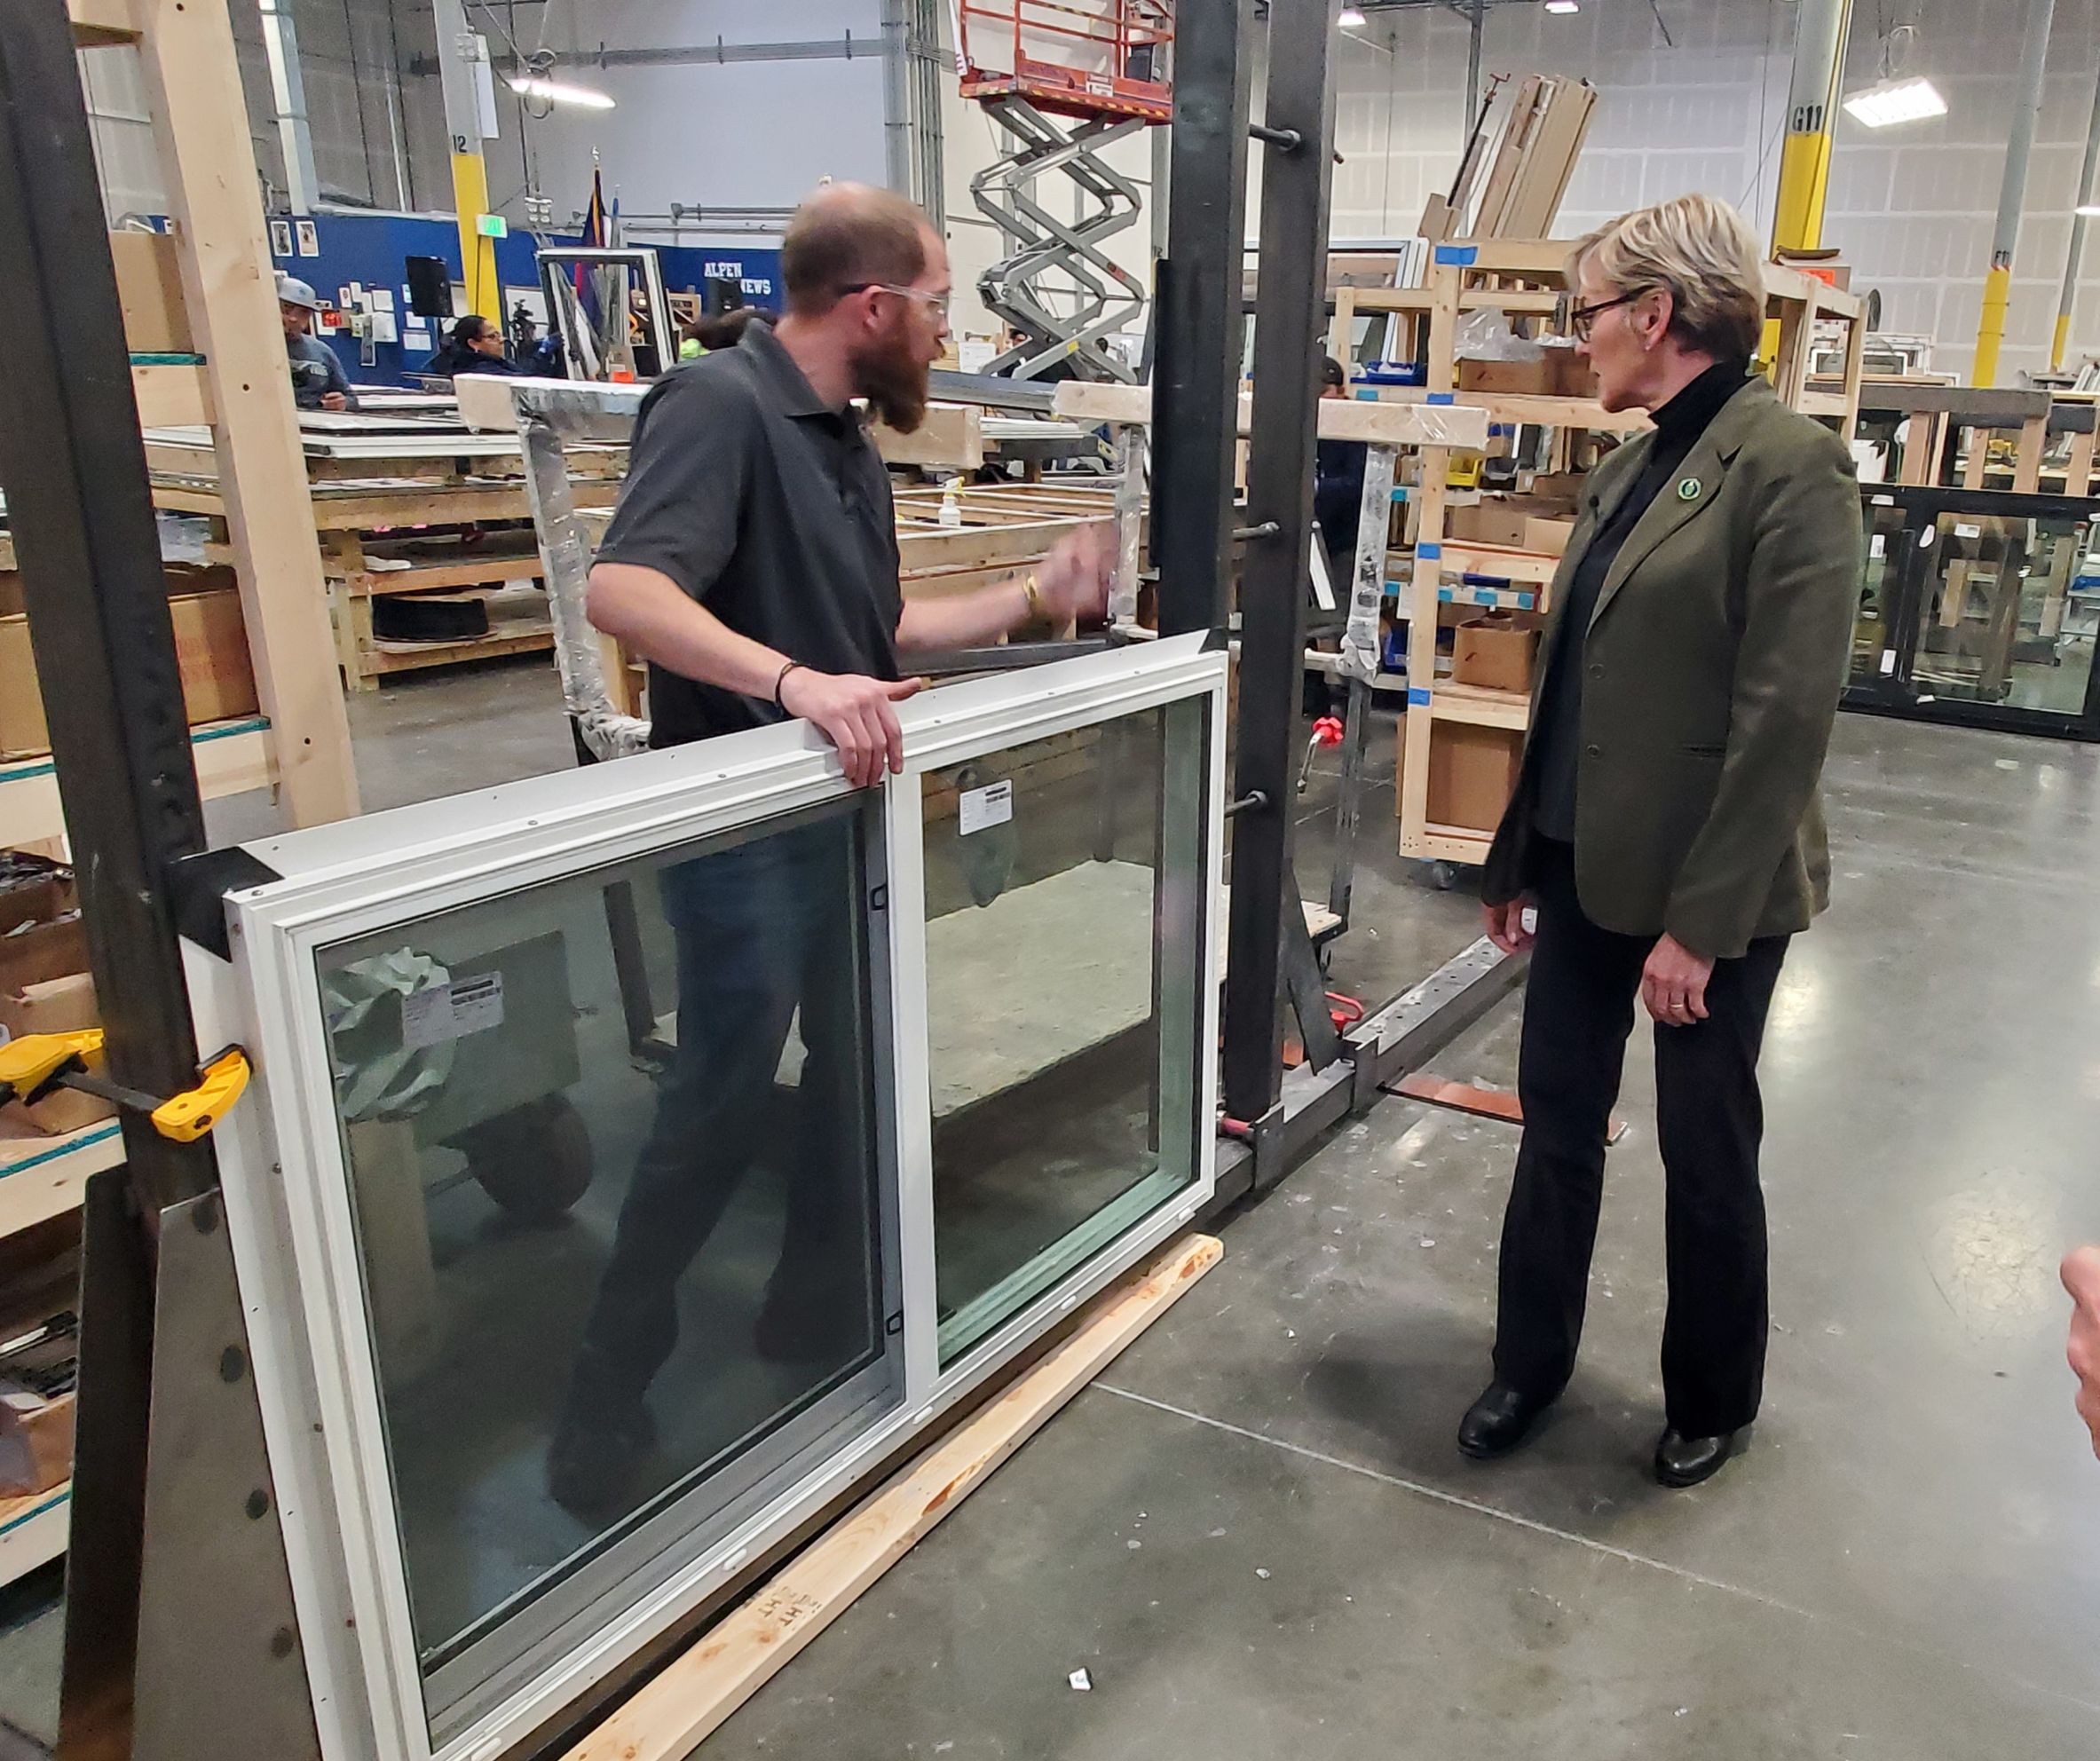 Alpen to offer its multi-pane windows to other manufacturers